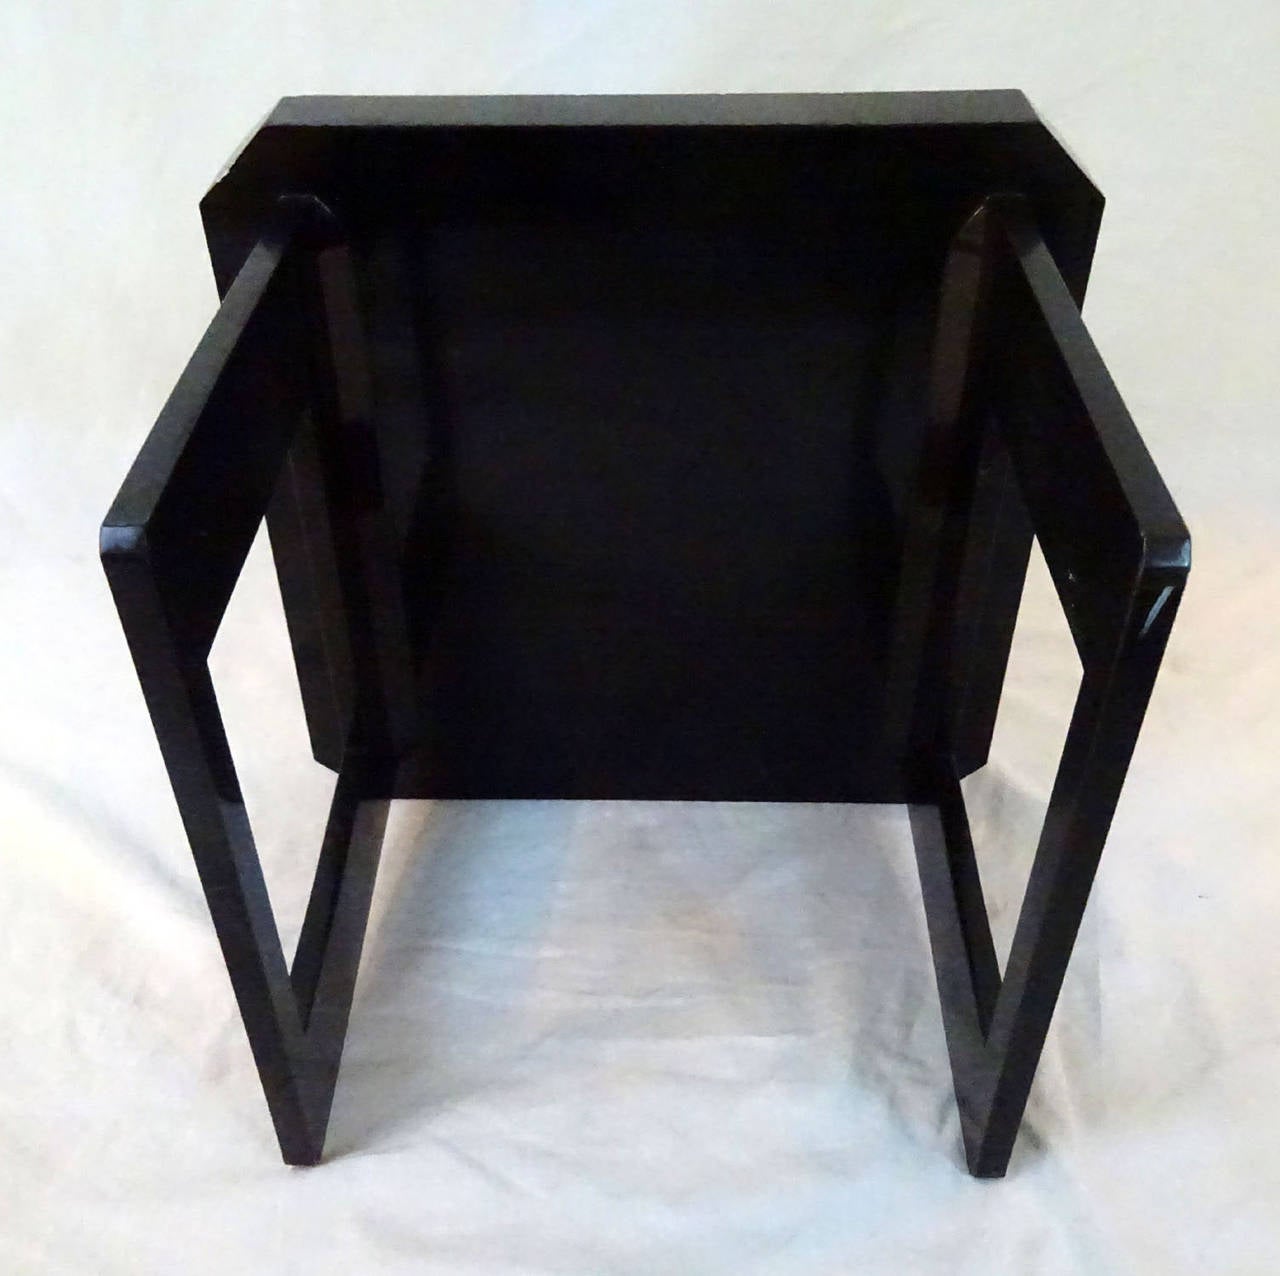 Early 20th Century Ebonized Lacquer Small Tray Table from the Orient For Sale 6